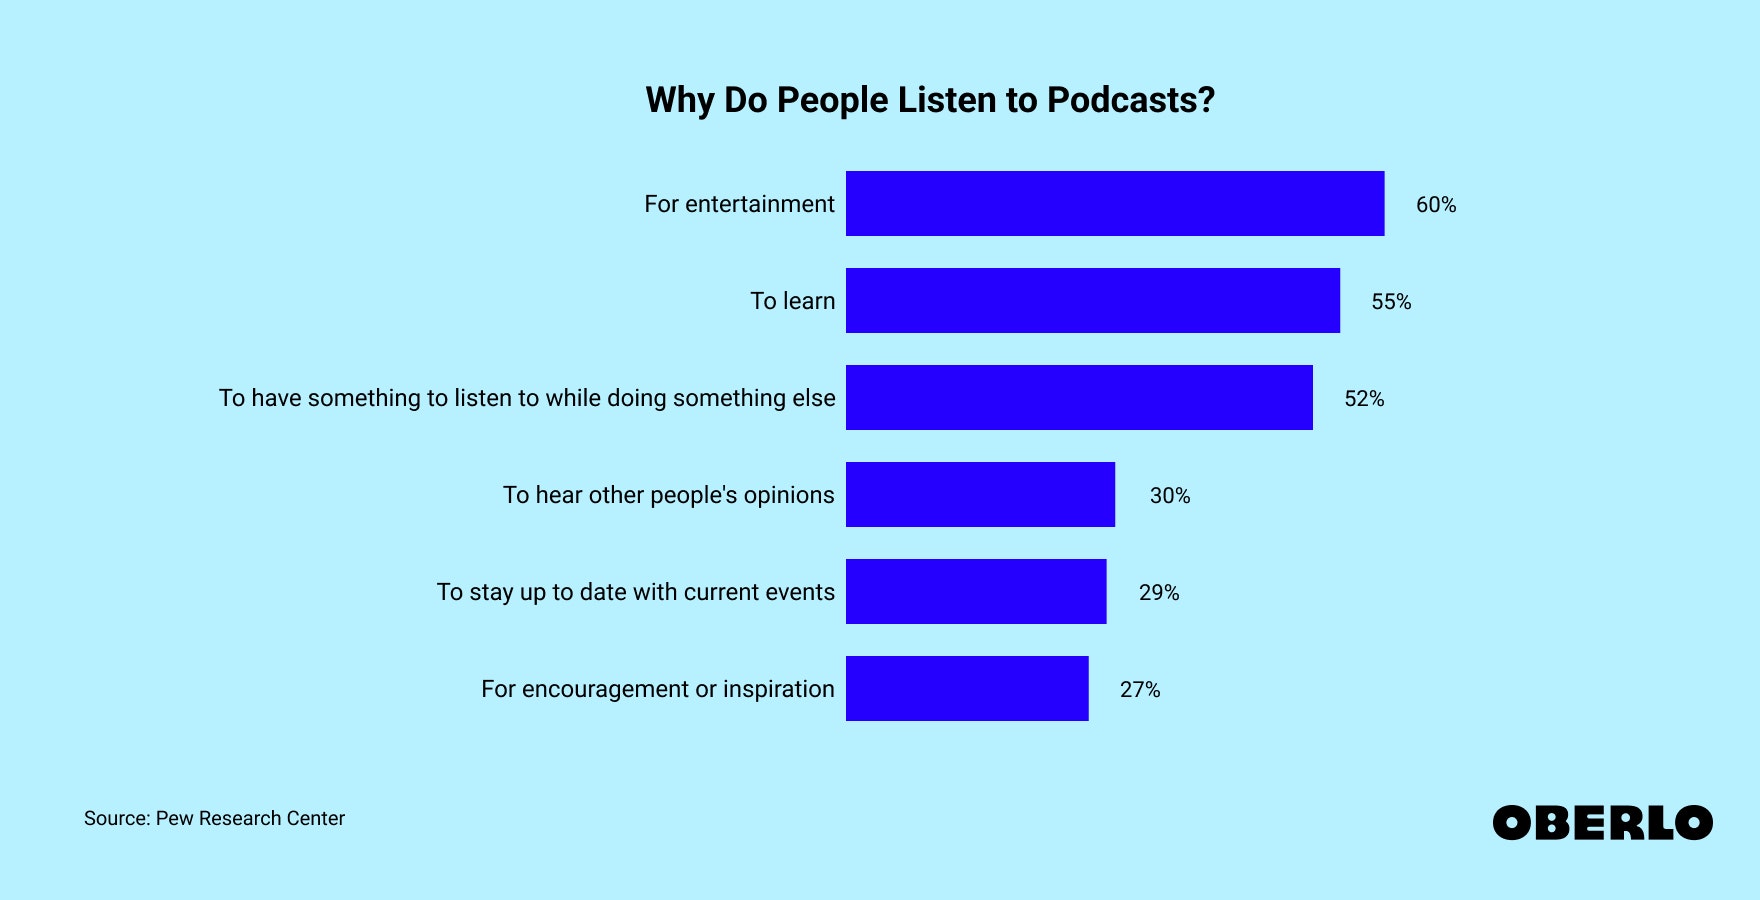 Chart of the top reasons people listen to podcasts